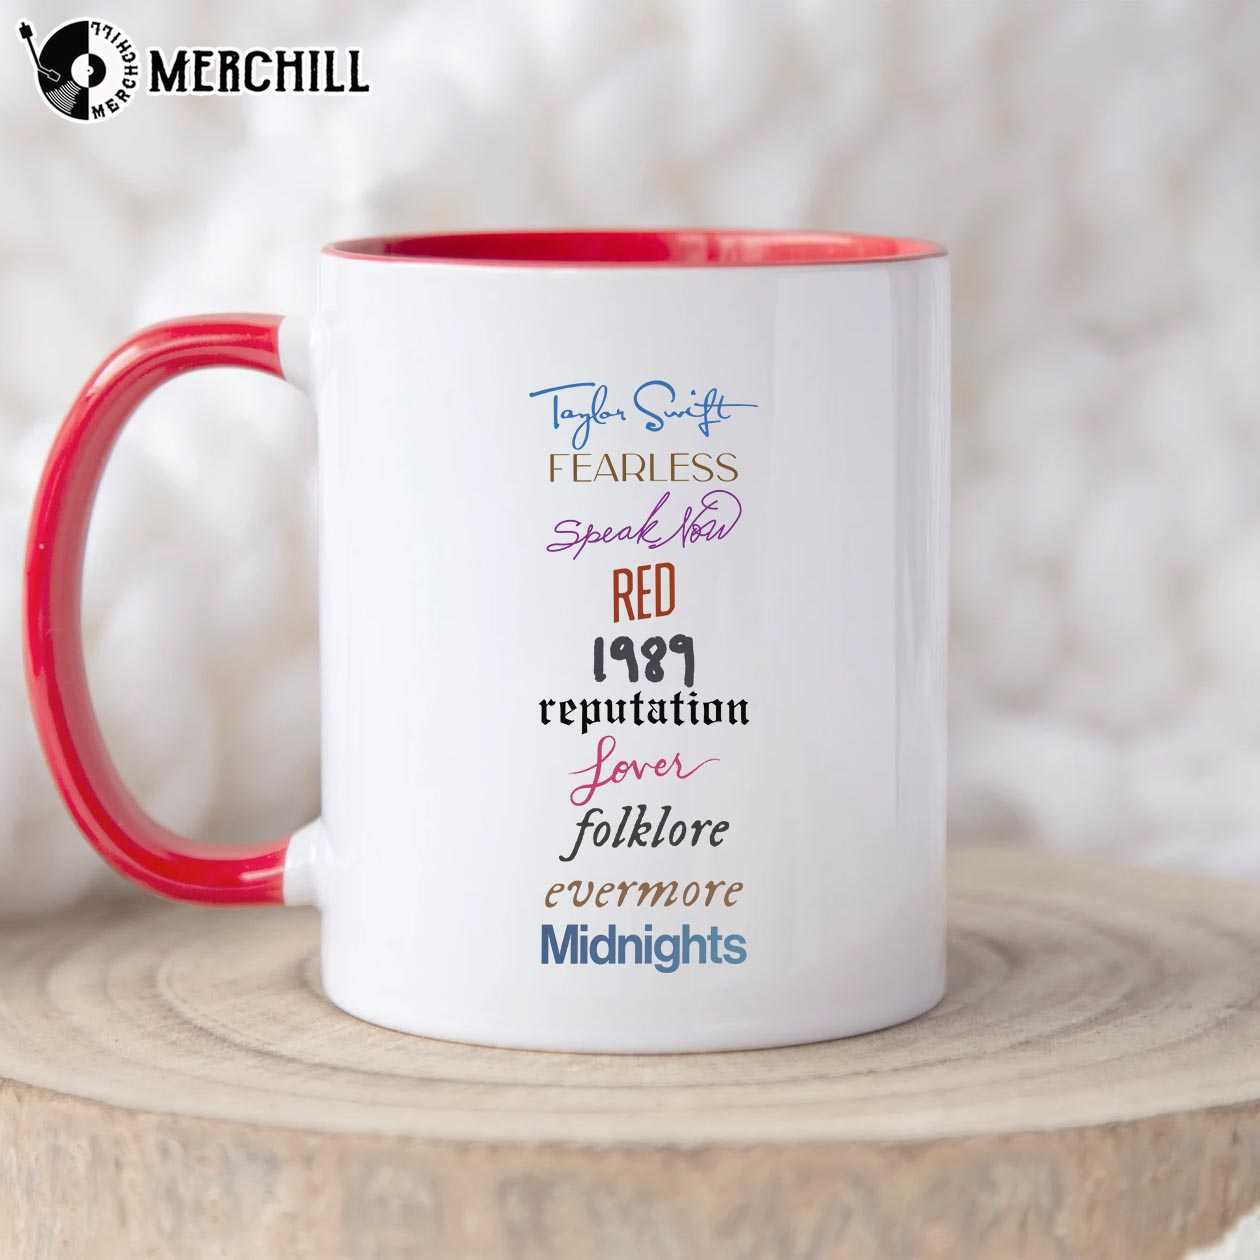 https://images.merchill.com/wp-content/uploads/2022/12/Taylor-Swift-Album-Mug-Gifts-for-Swifties-Folklore-Evermore-Midnights-3.jpg